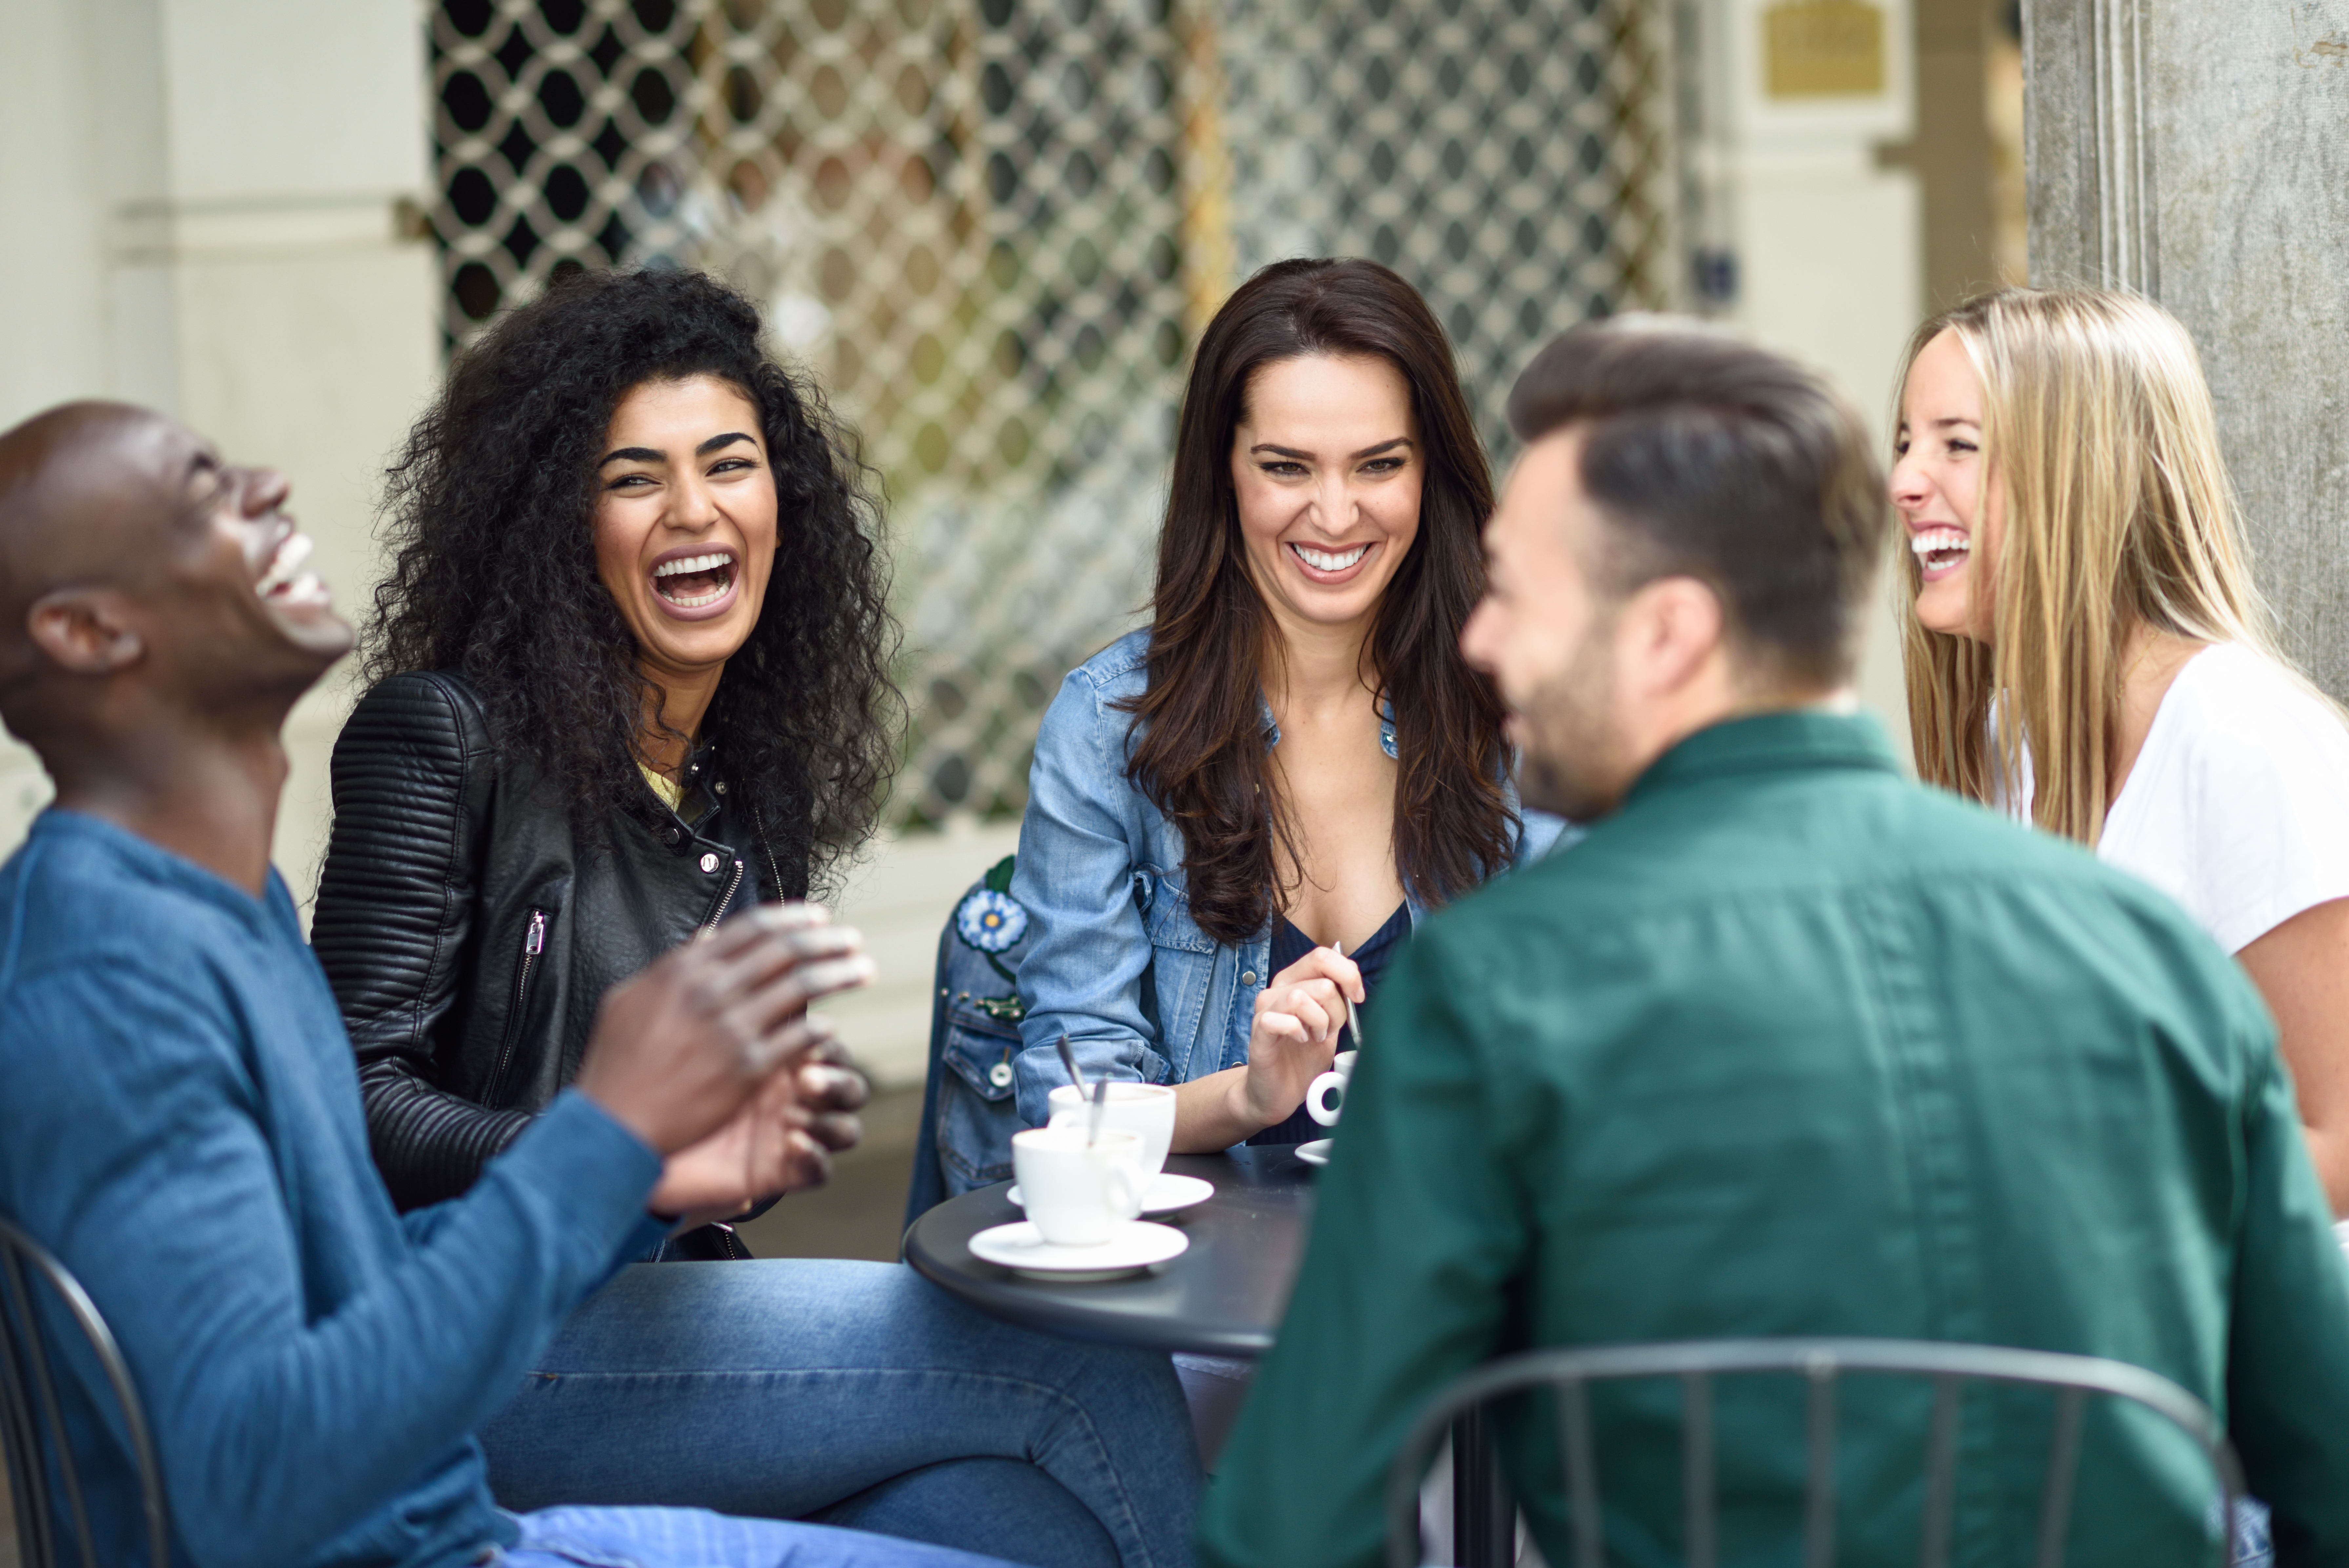 group laughing over coffee